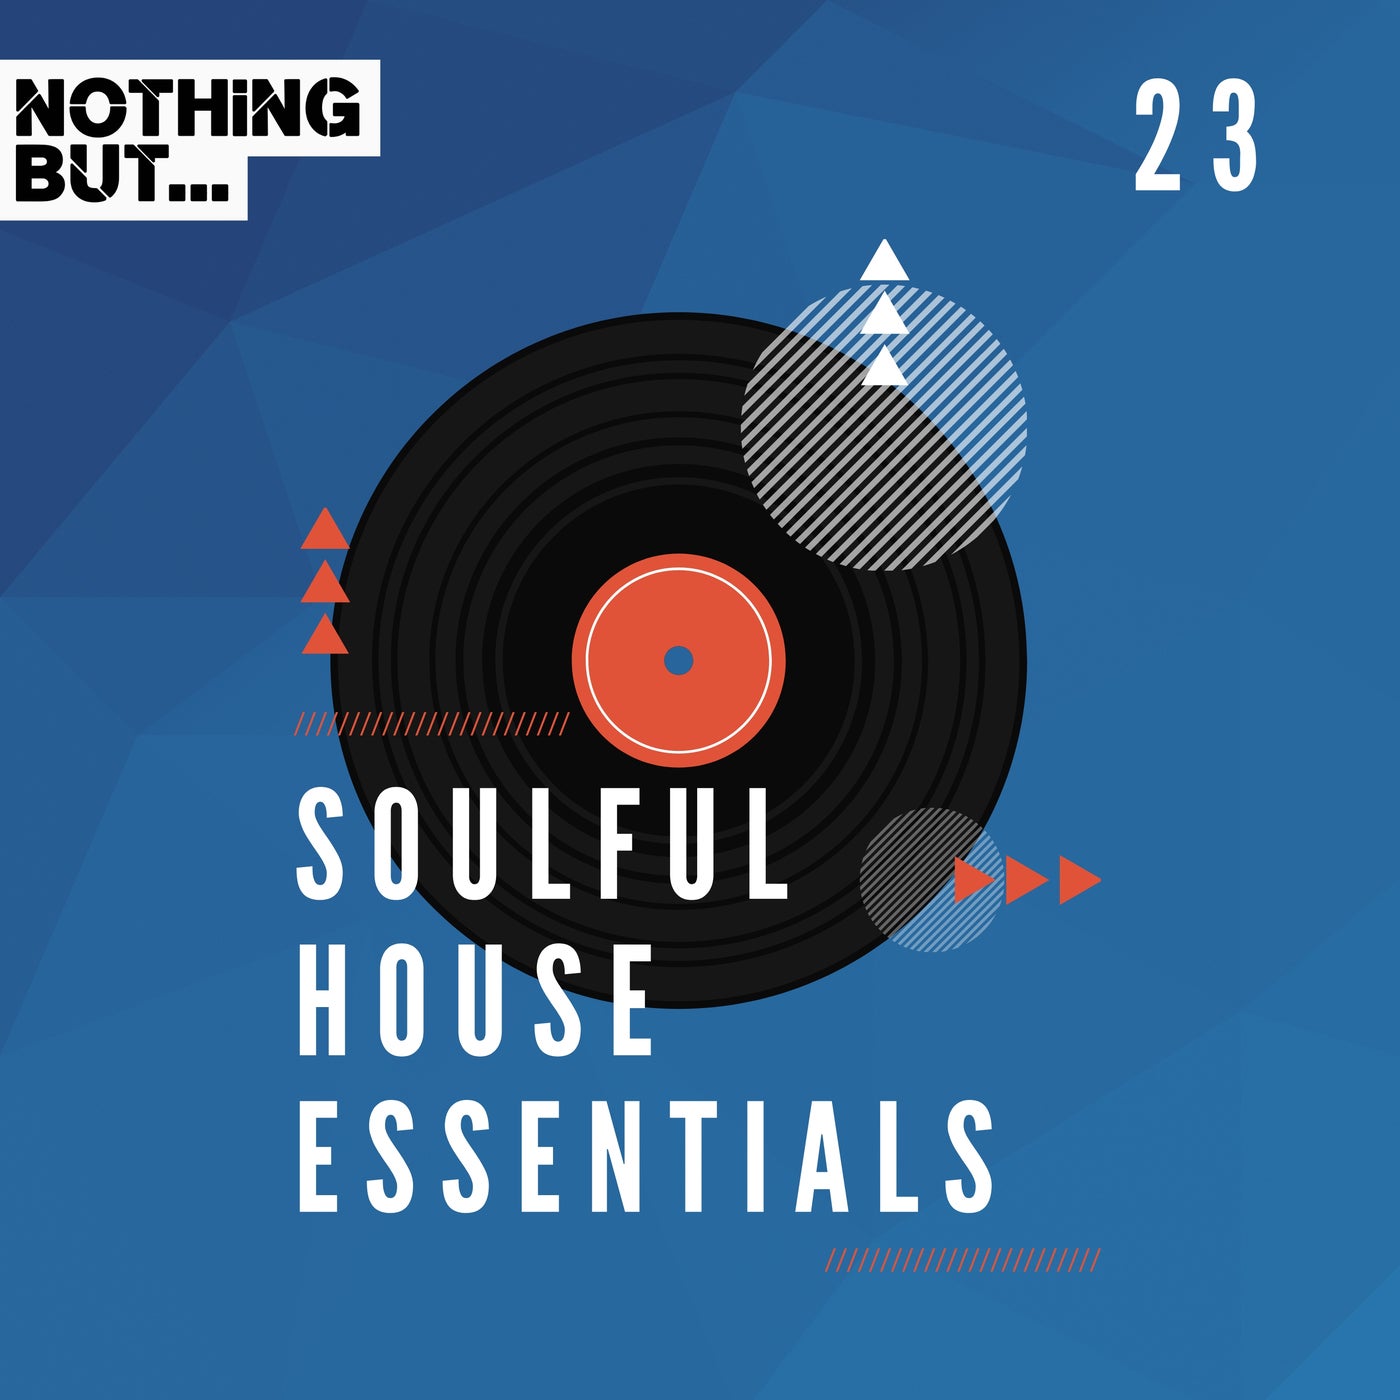 Nothing But... Soulful House Essentials, Vol. 23